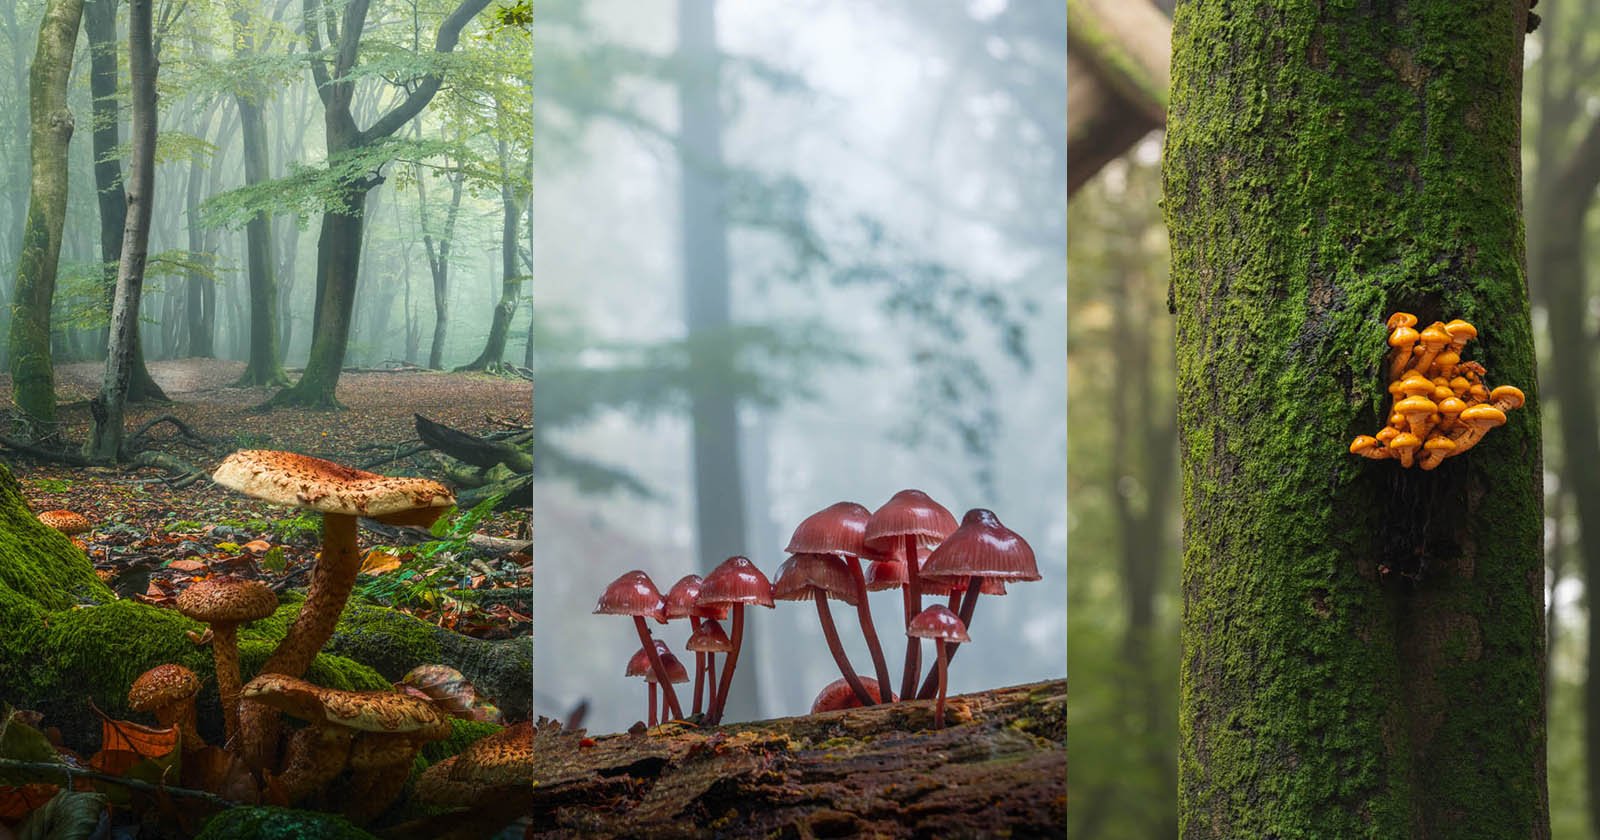 Photographing Mushrooms in Their Natural World